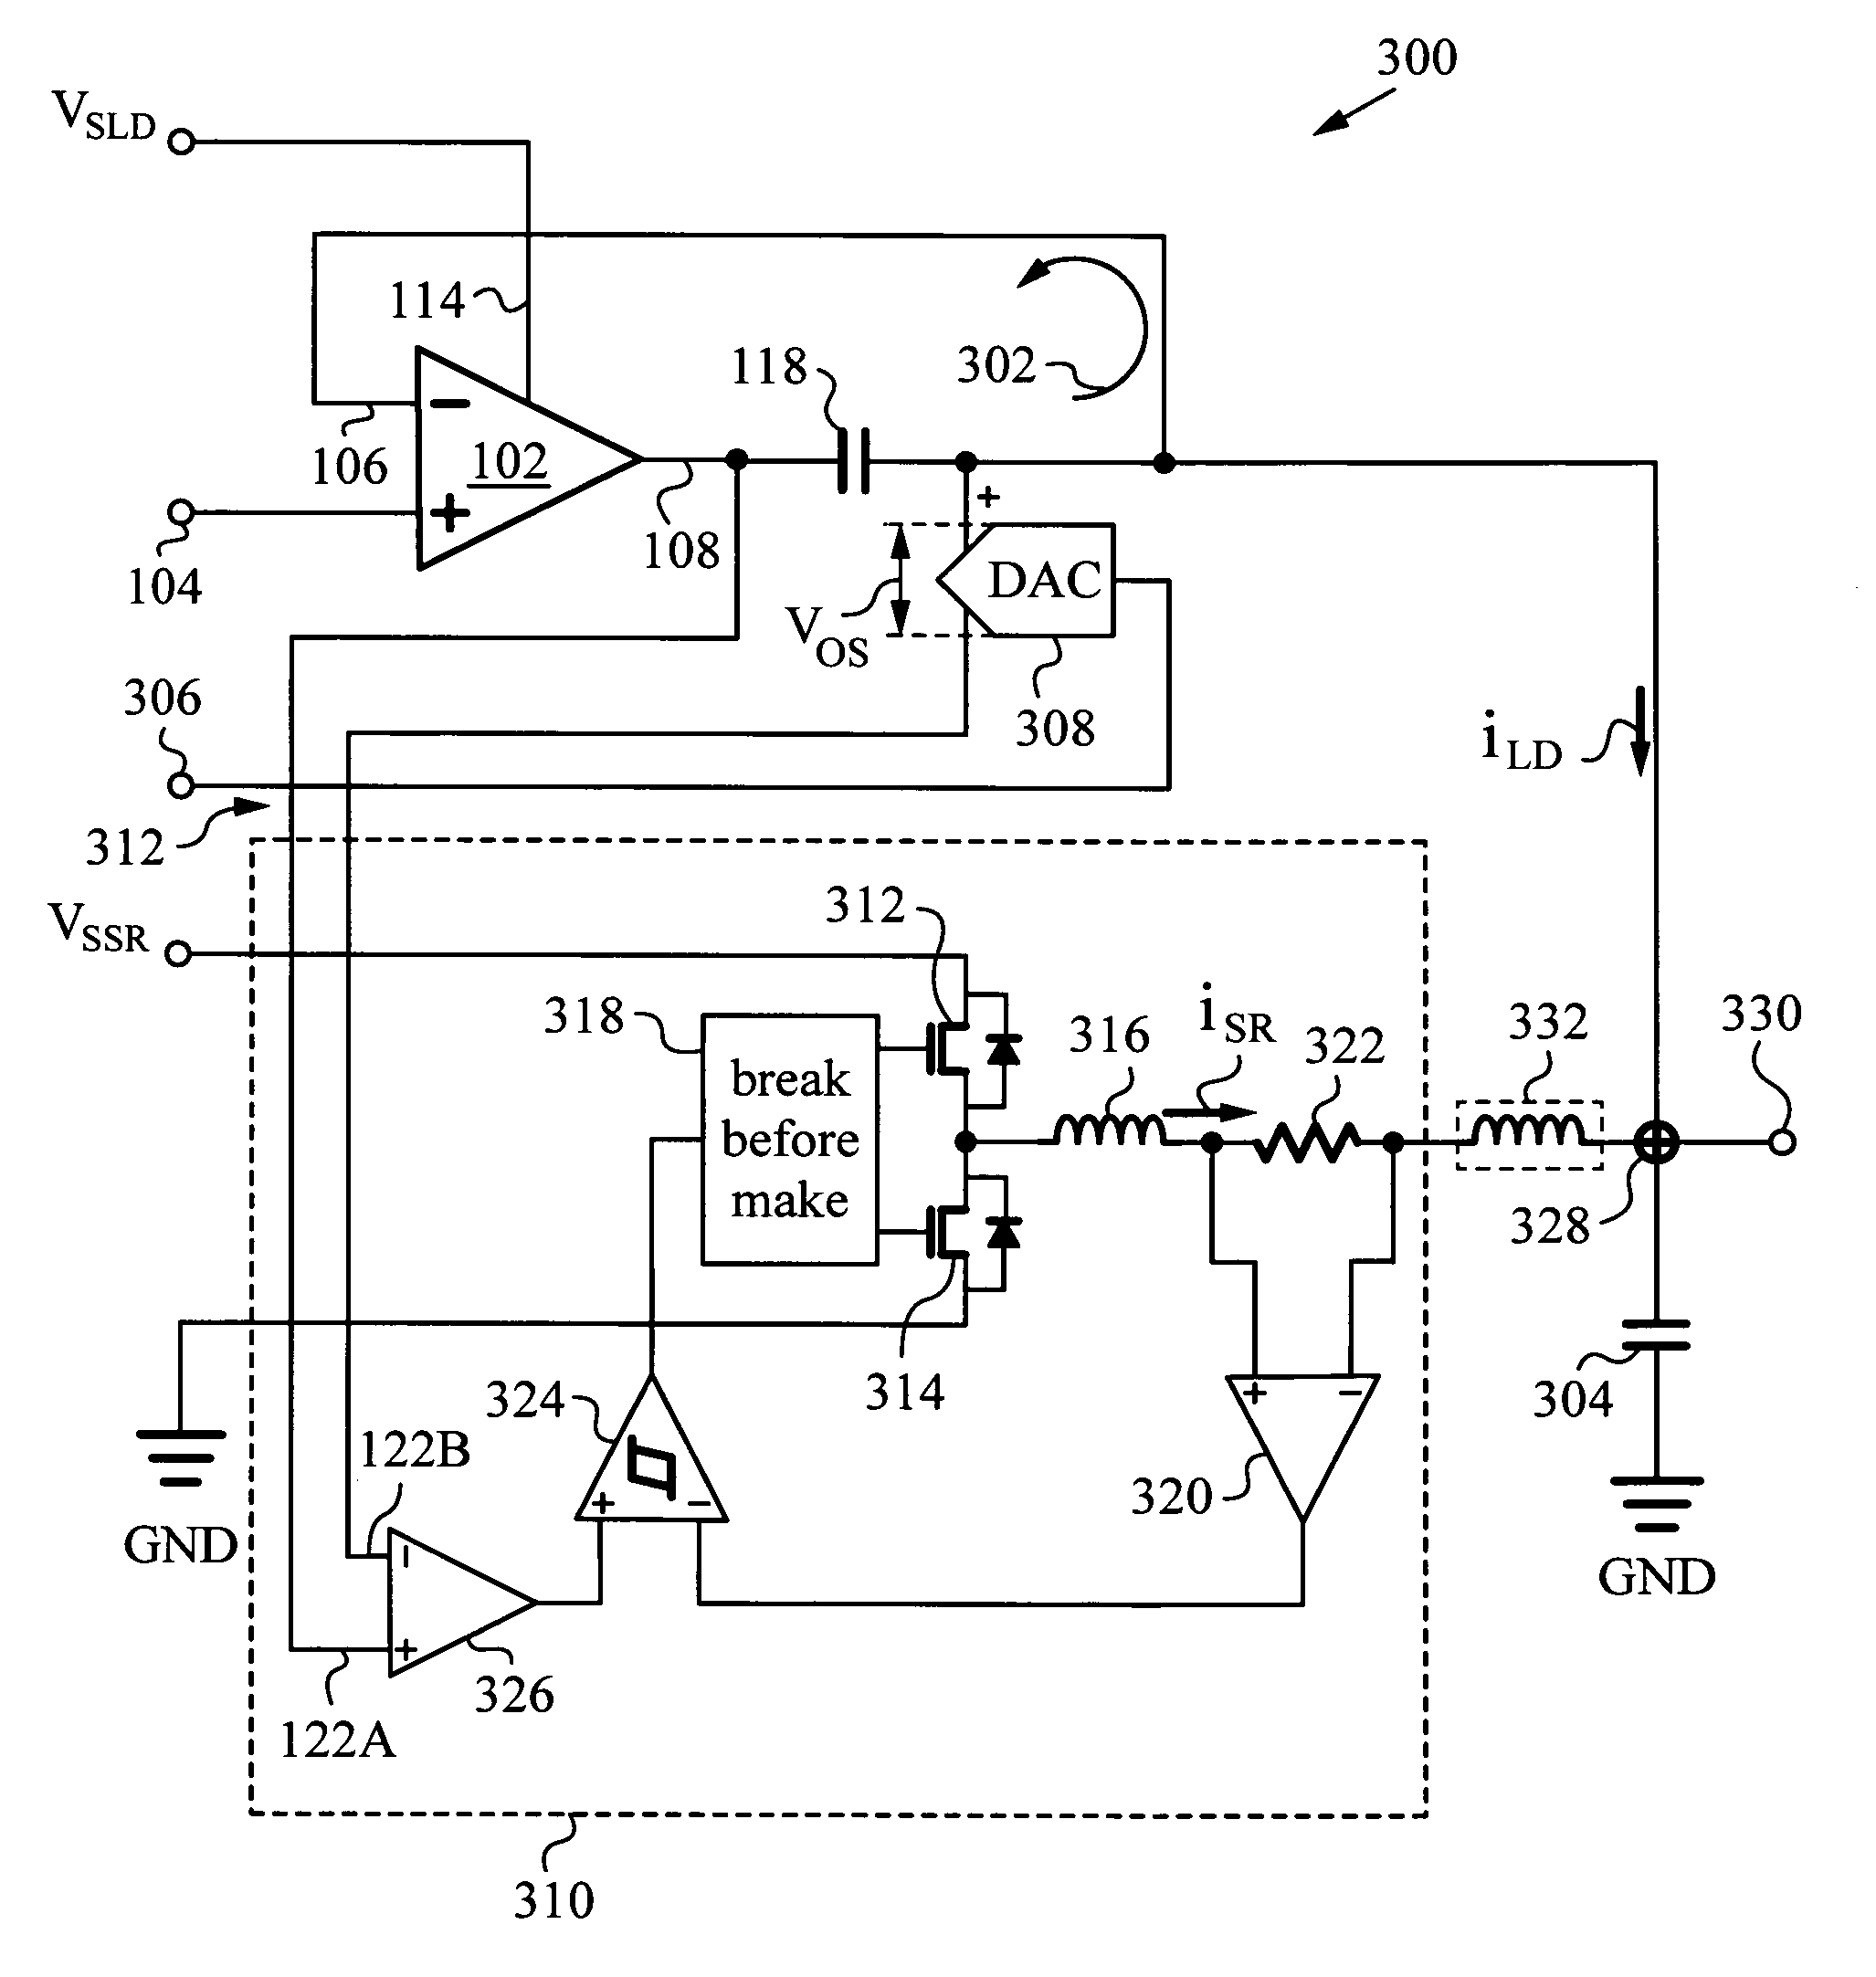 Dynamic power supply employing a linear driver and a switching regulator